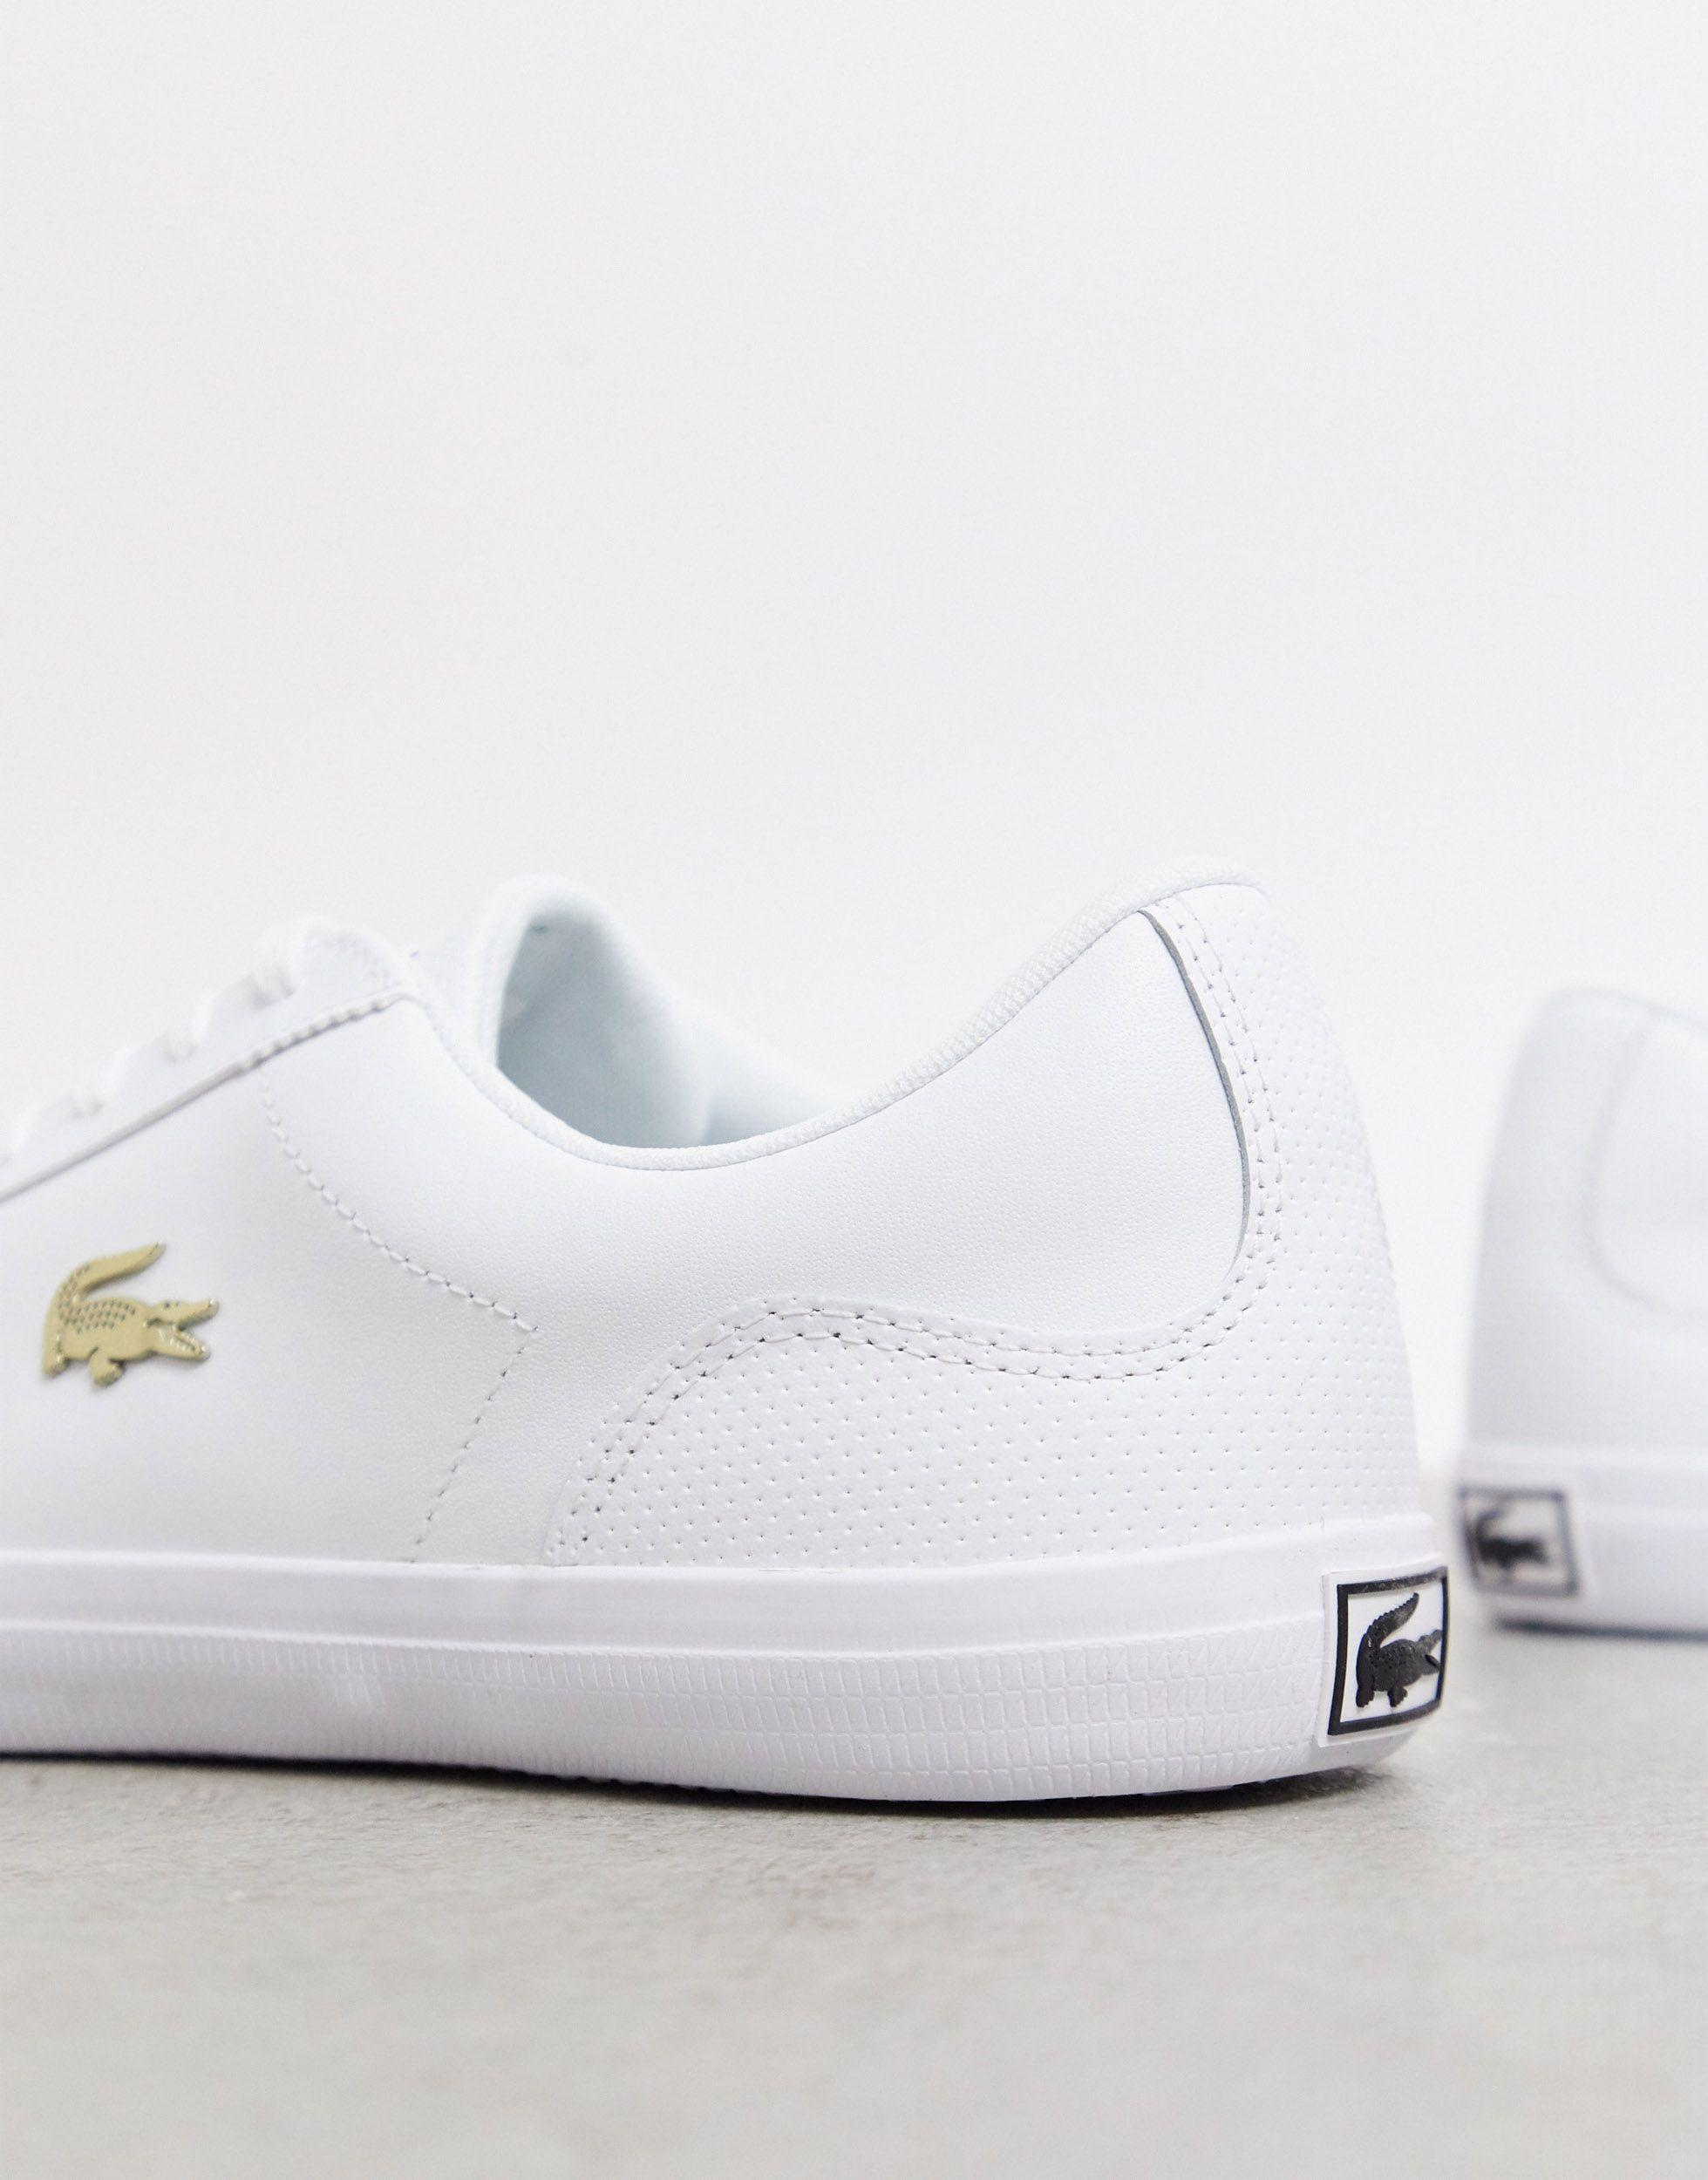 Lerond Gold Croc Sneakers in White for Lyst